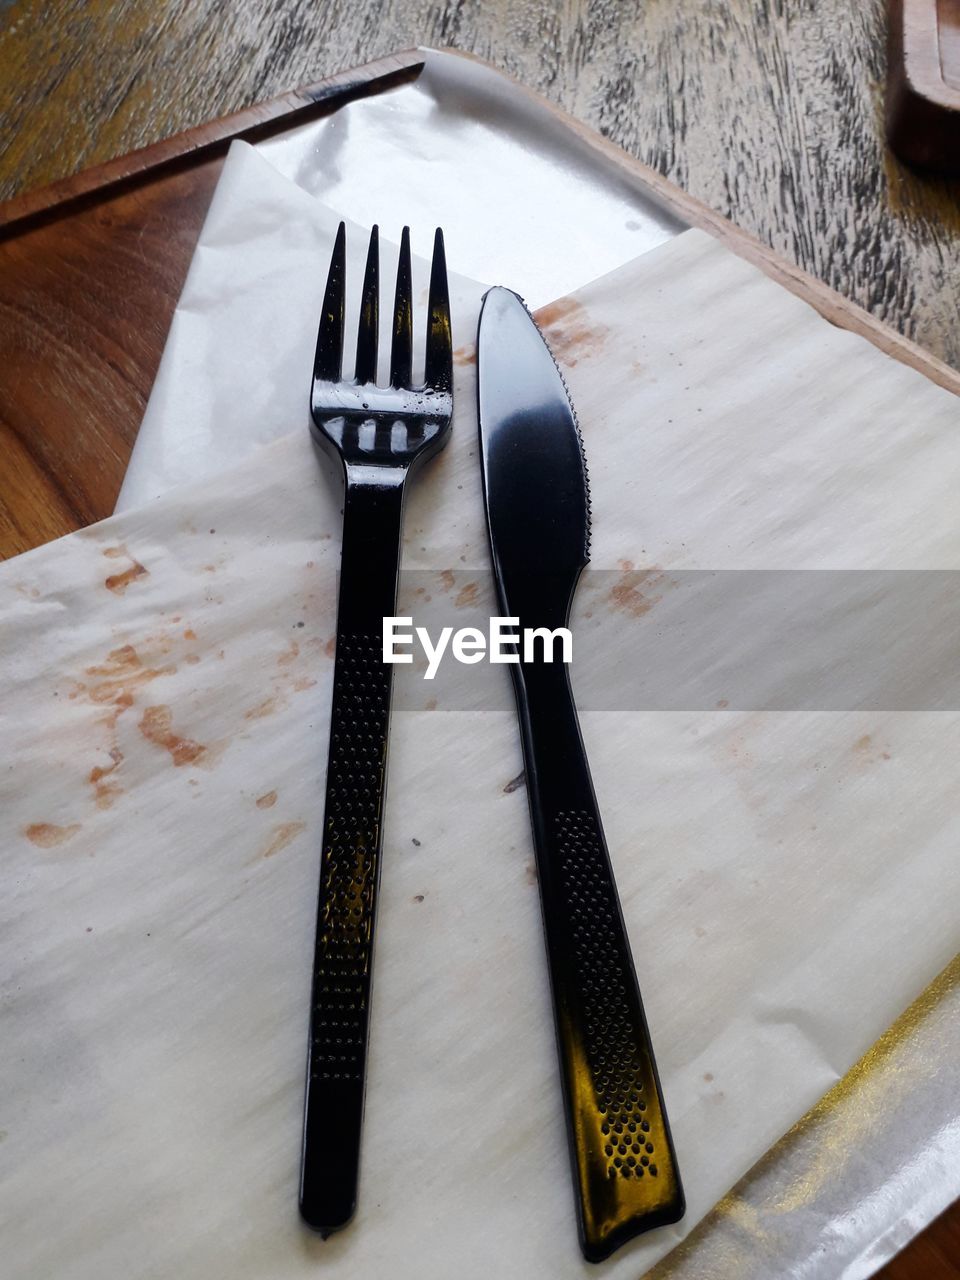 HIGH ANGLE VIEW OF FORK AND KNIFE ON TABLE